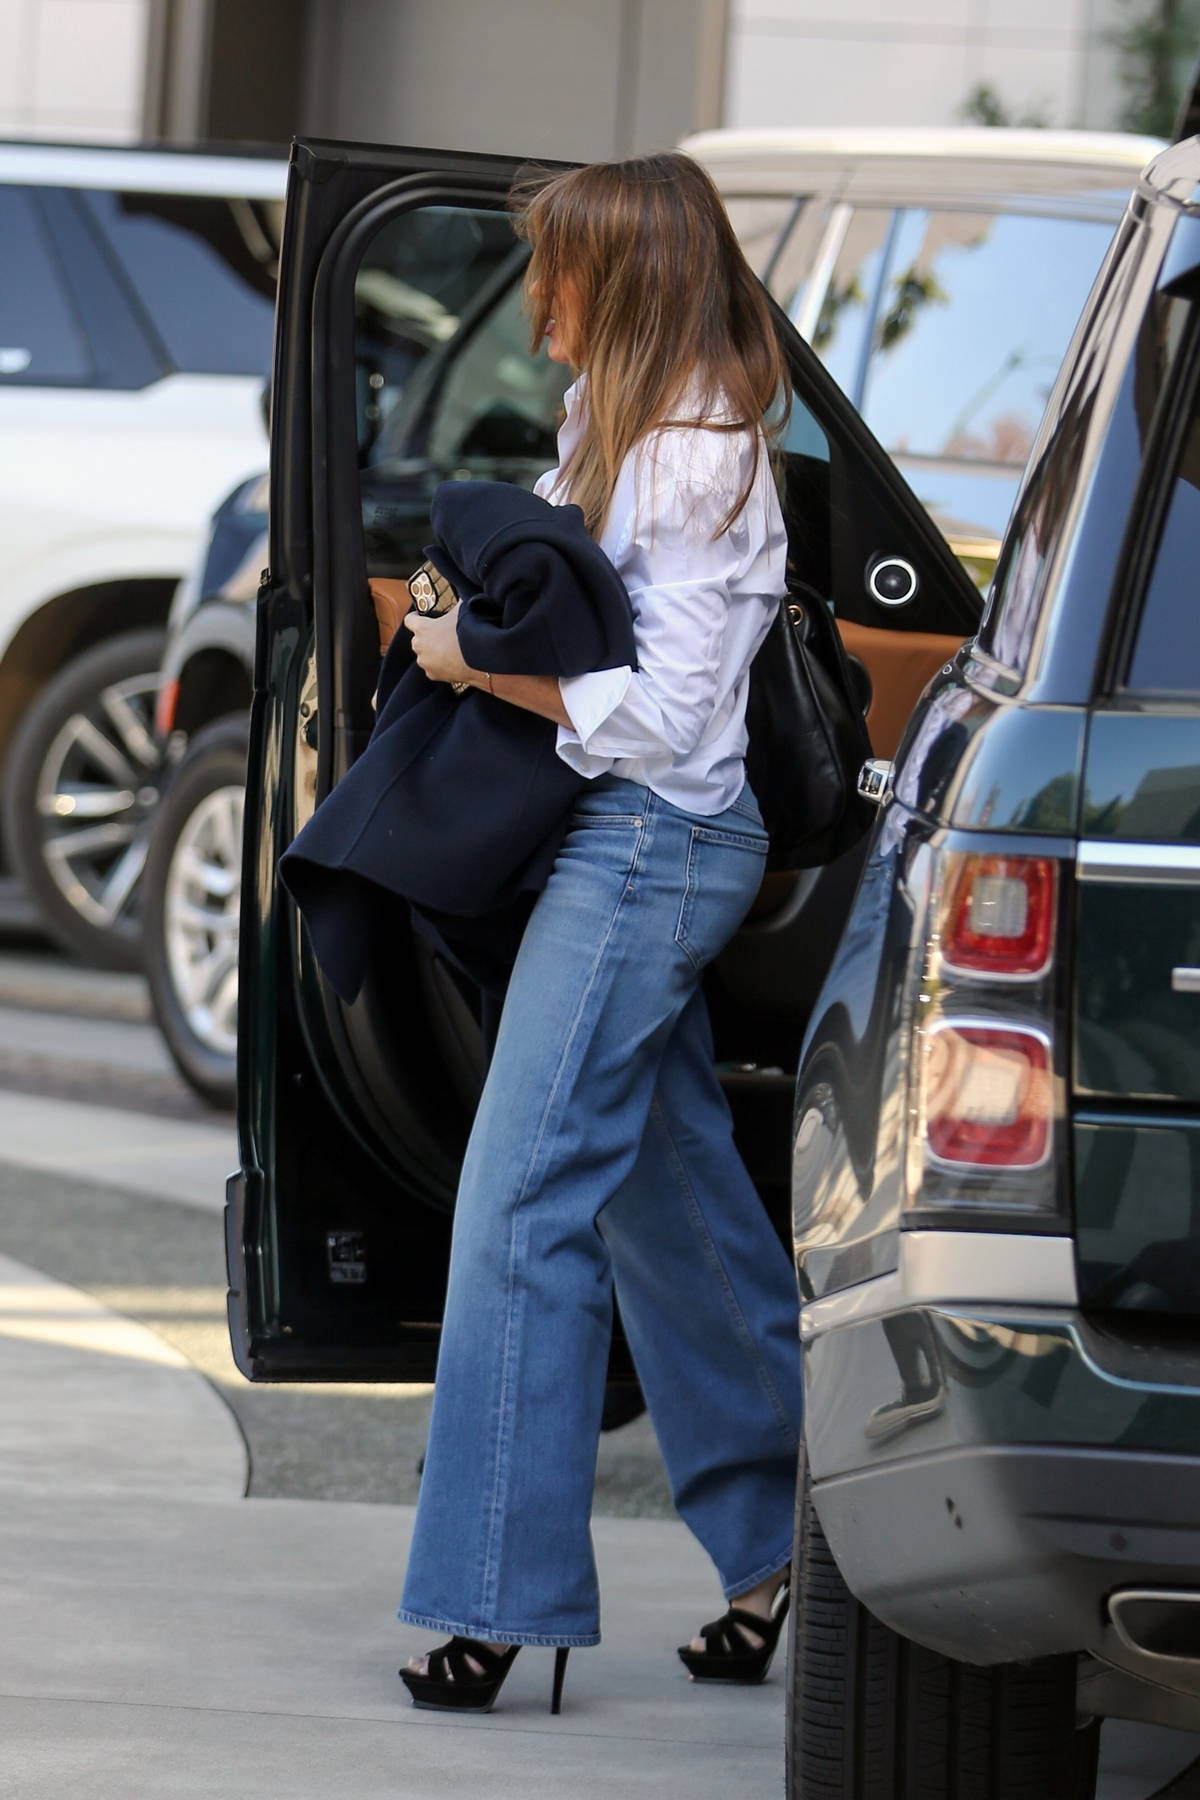 https://www.celebsfirst.com/wp-content/uploads/2024/02/Sofia-Vergara-wears-a-white-shirt-and-blue-jeans-while-attending-a-meeting-at-Wardrobe-Hotel-in-Beverly-Hills-California-130224_2.jpg